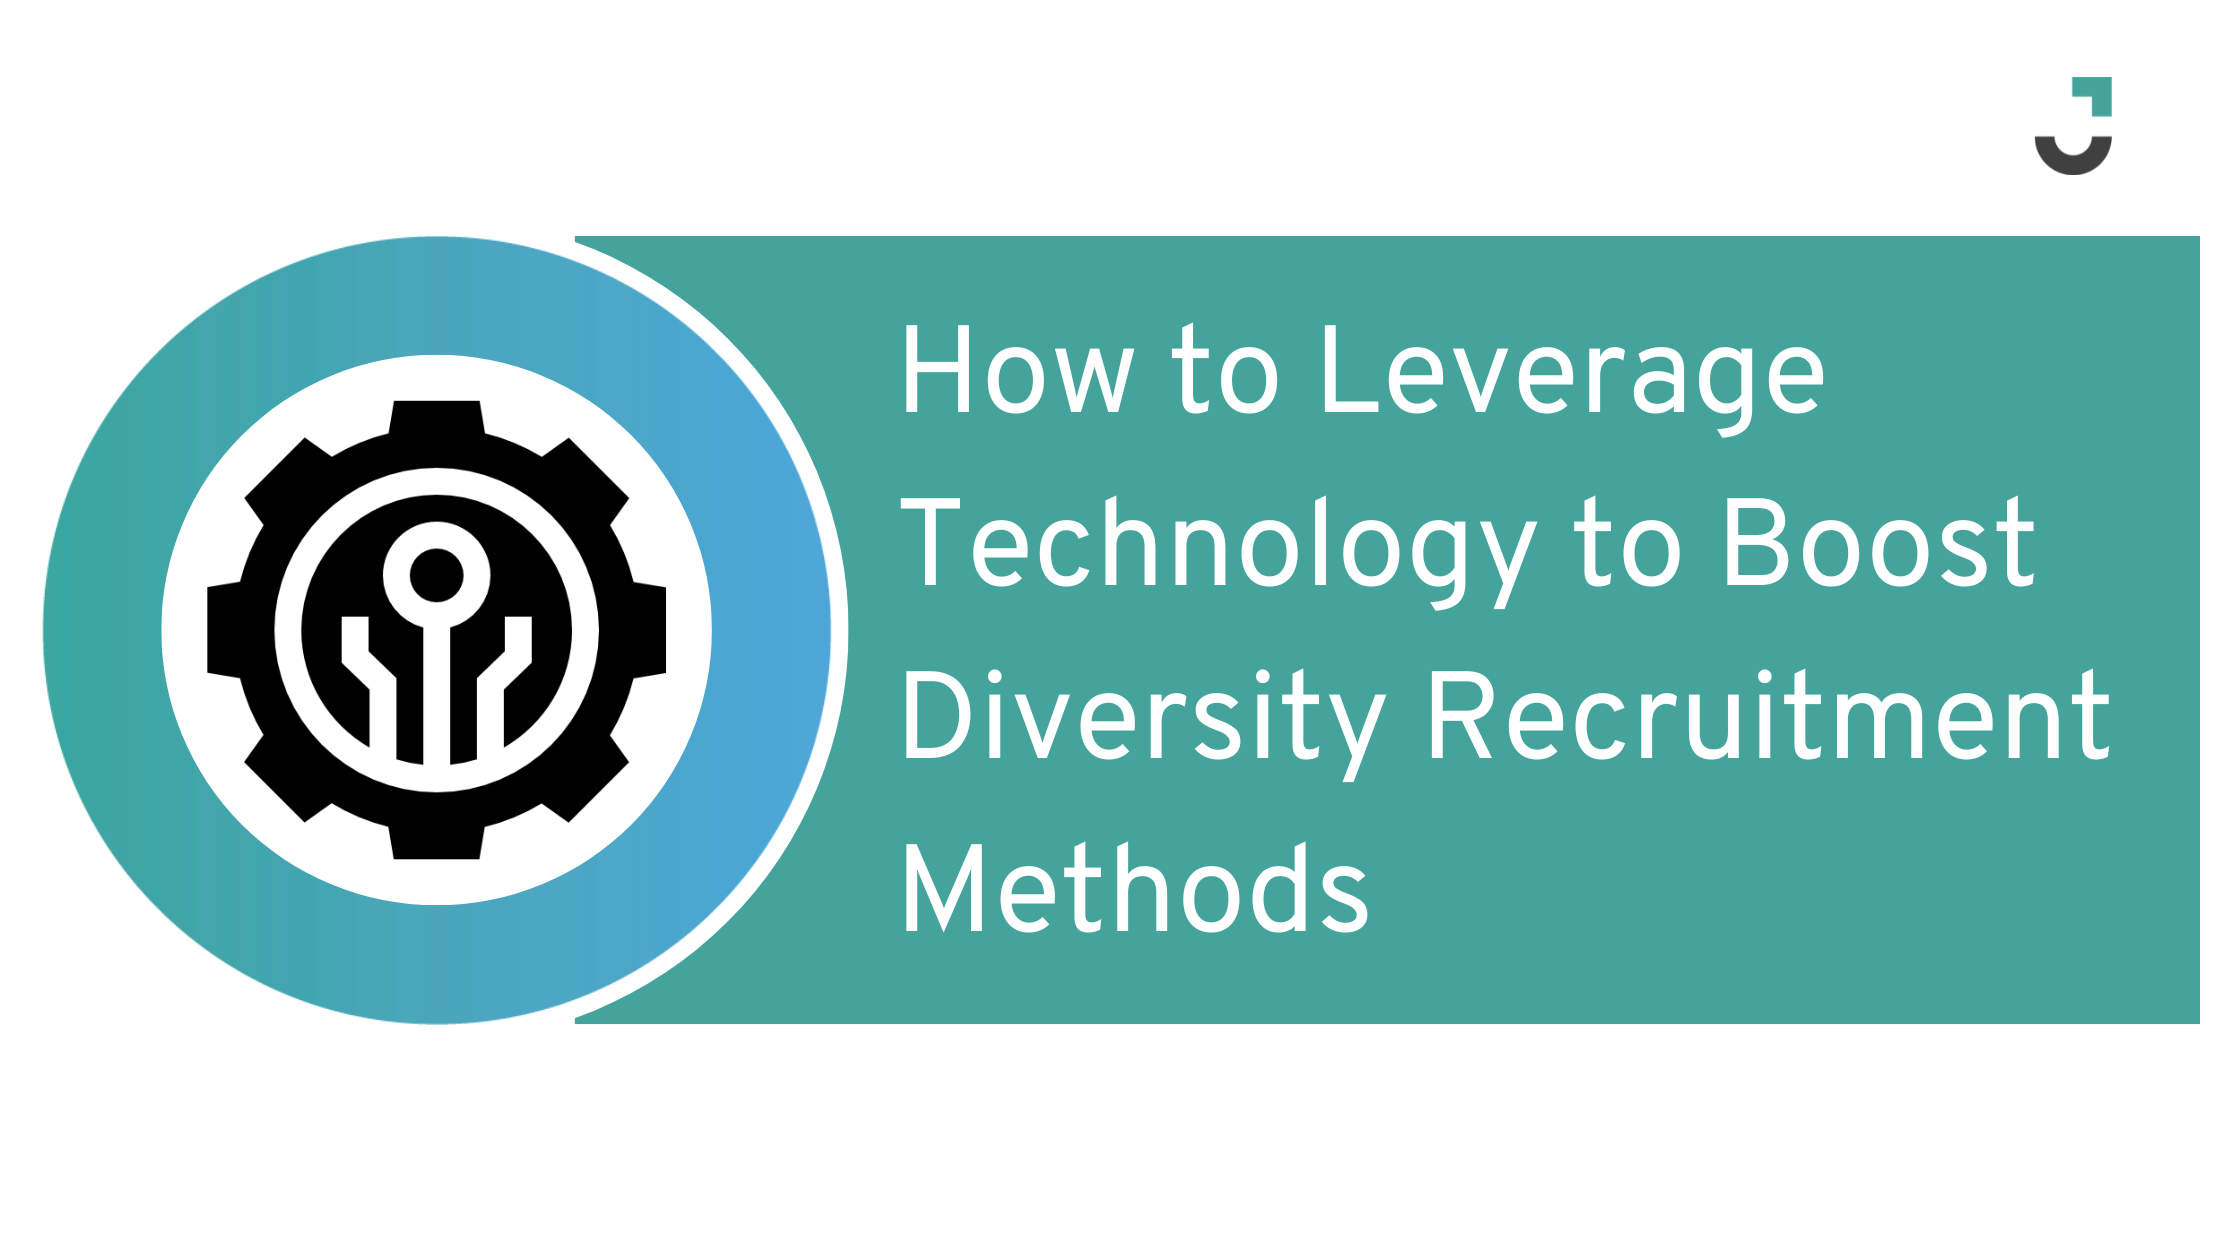 How to Leverage Technology to Boost Diversity Recruitment Methods